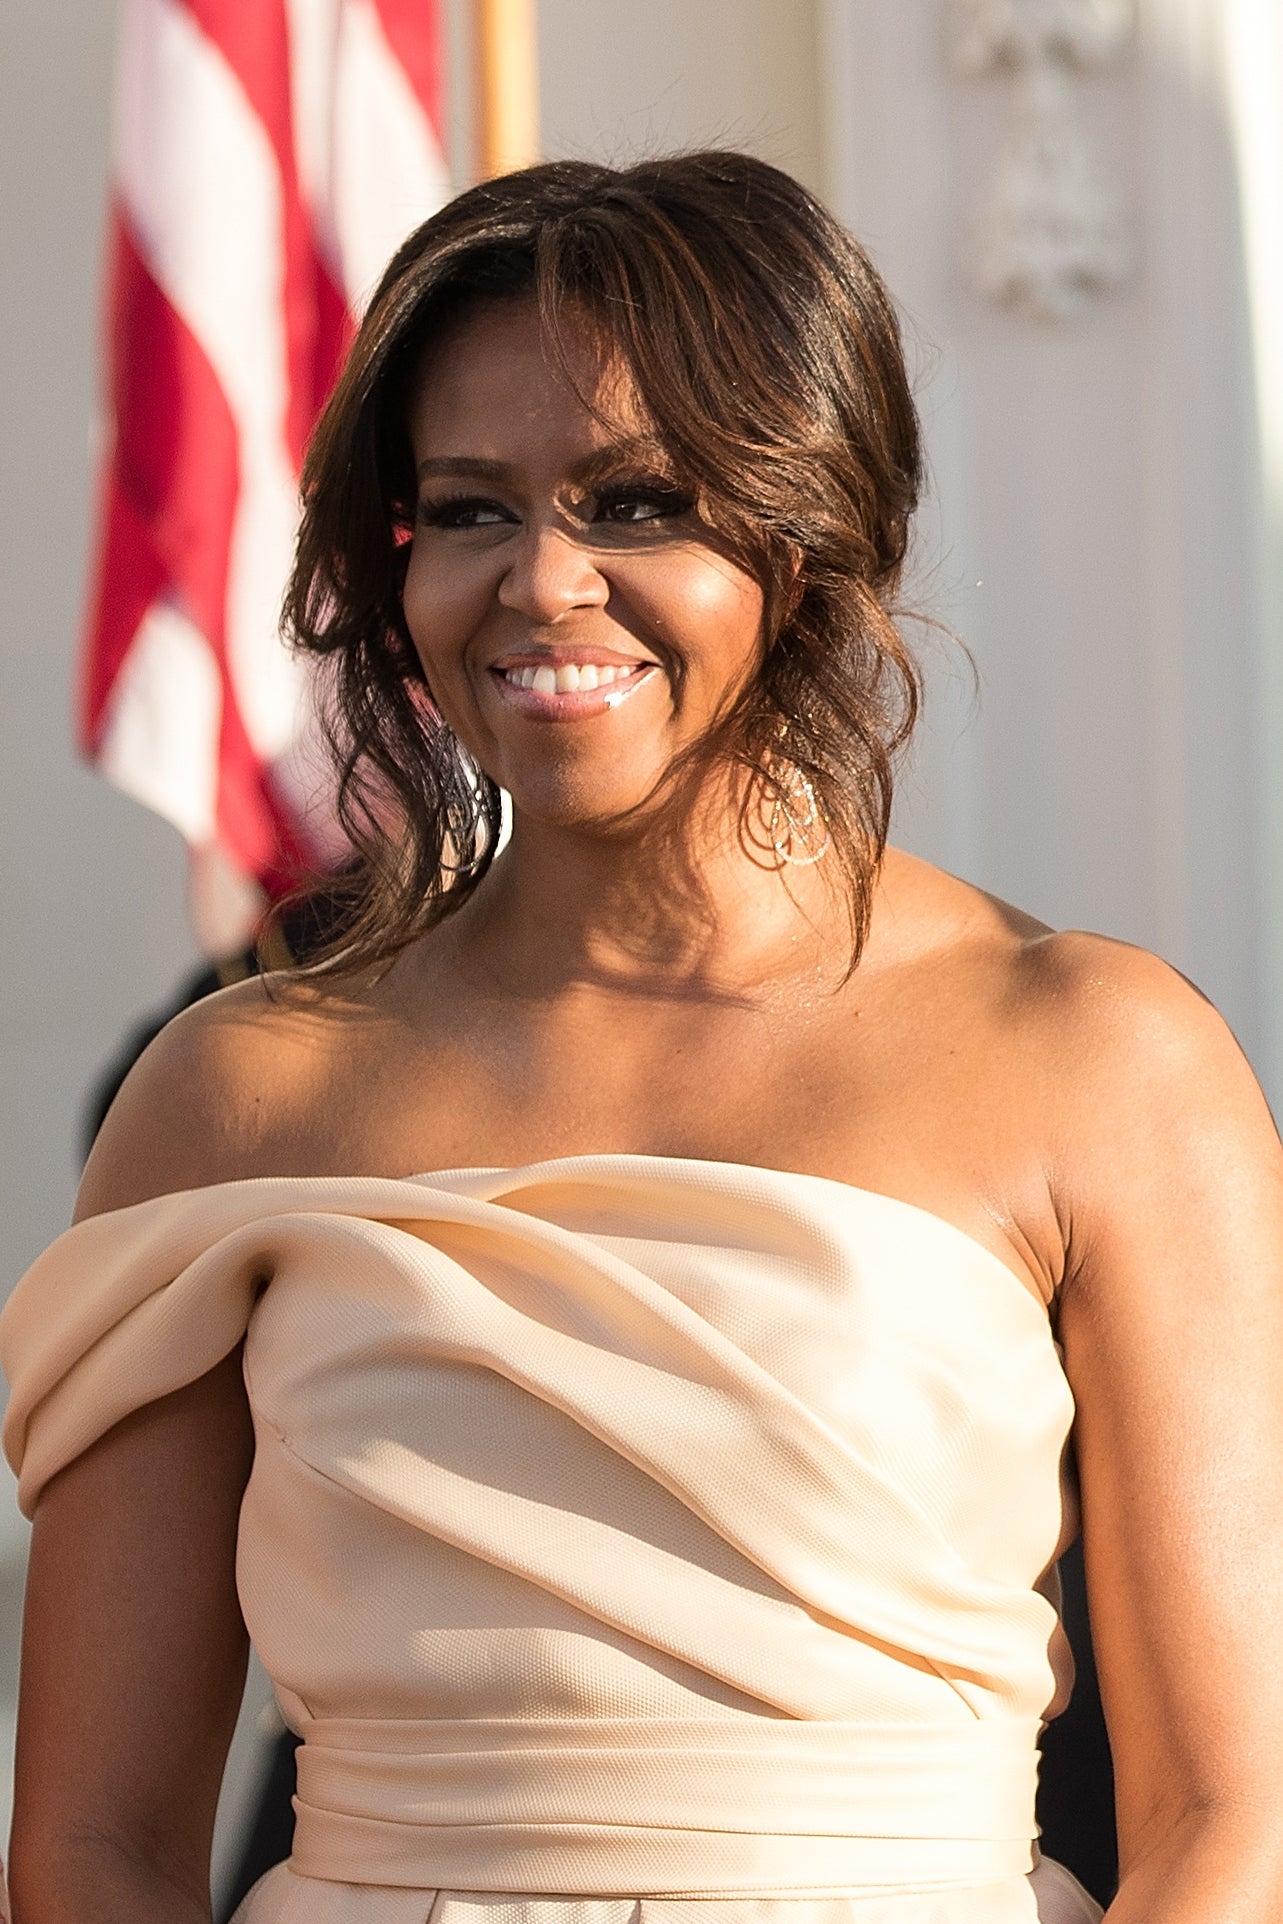 A Look Back At All Of Michelle Obama's Best Hair Moments In The White House
